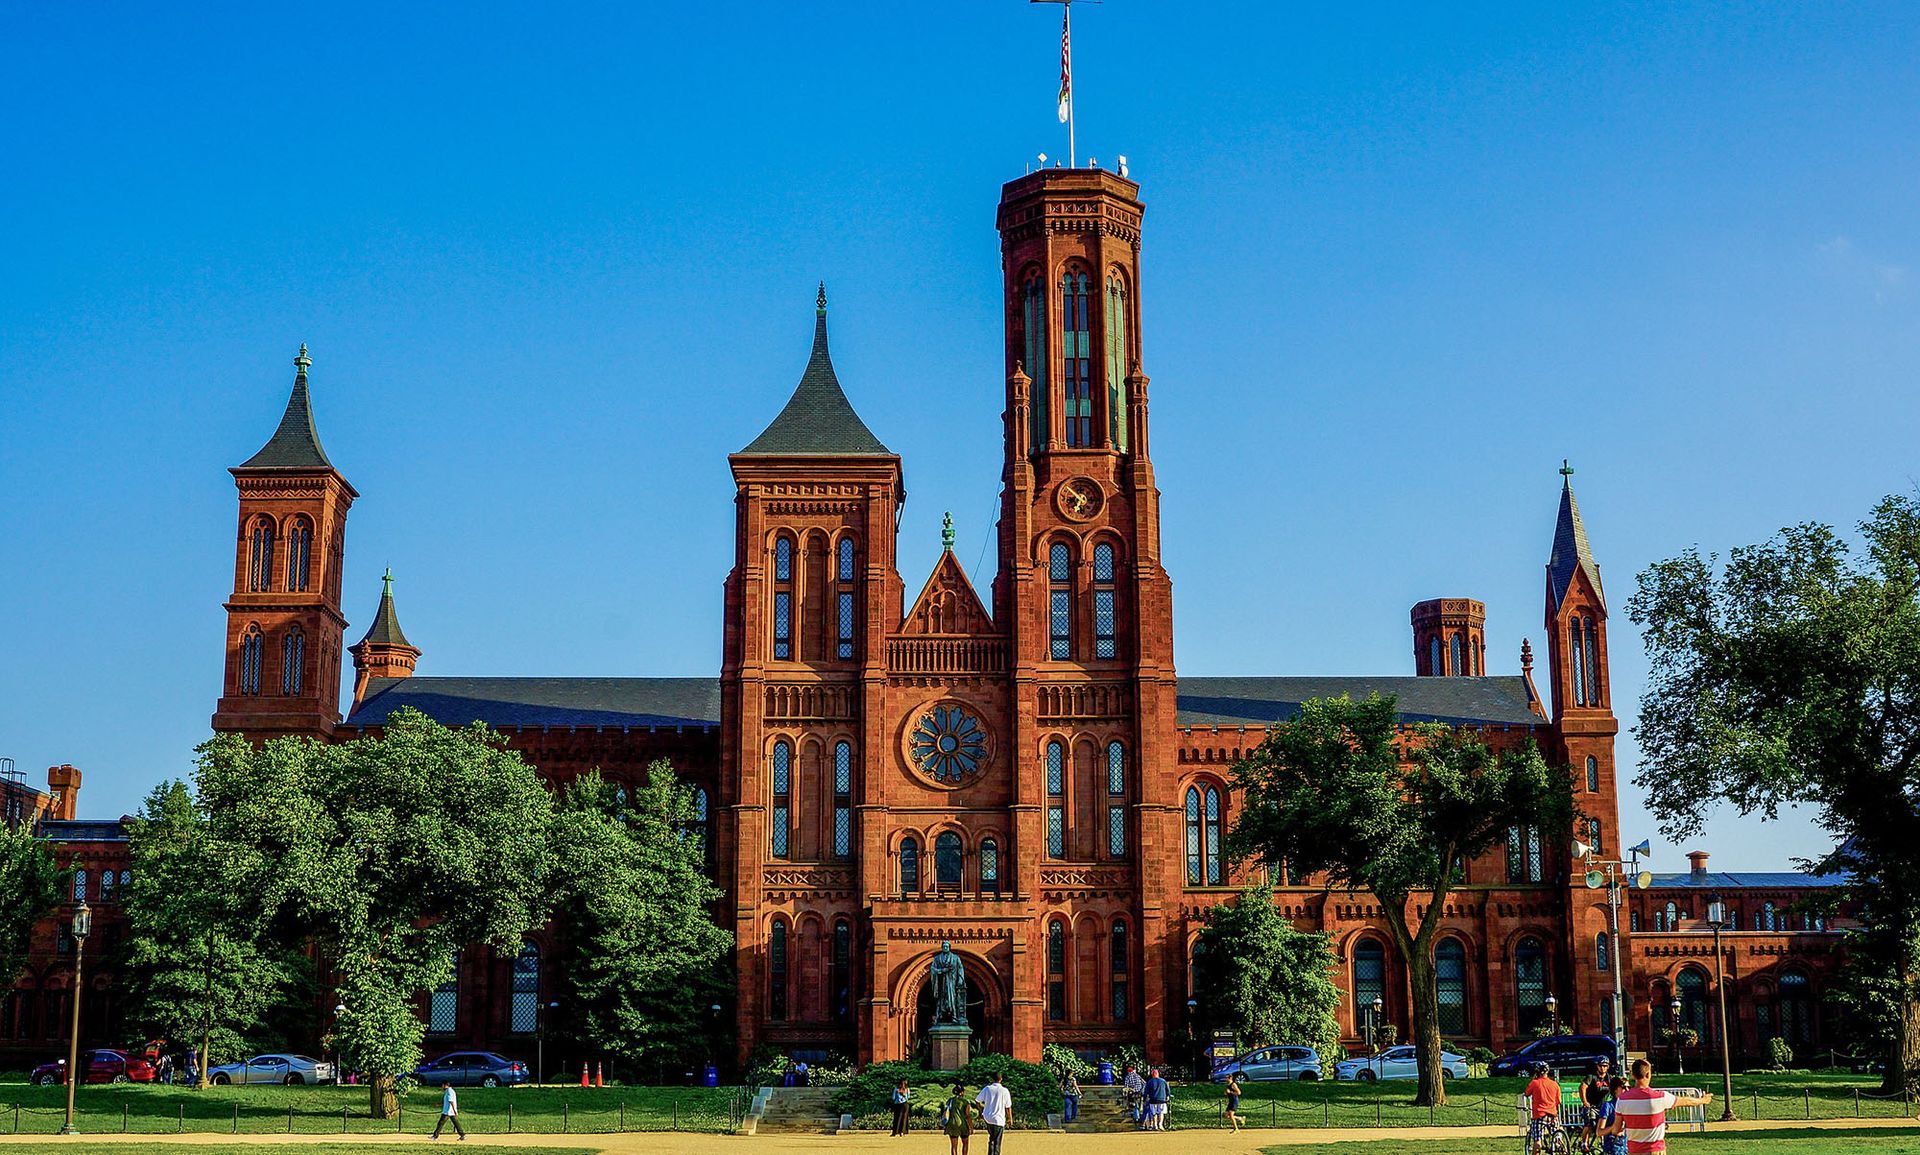 The Smithsonian Building in Washington, DC Photo by Nate Lee, via Wikimedia Commons